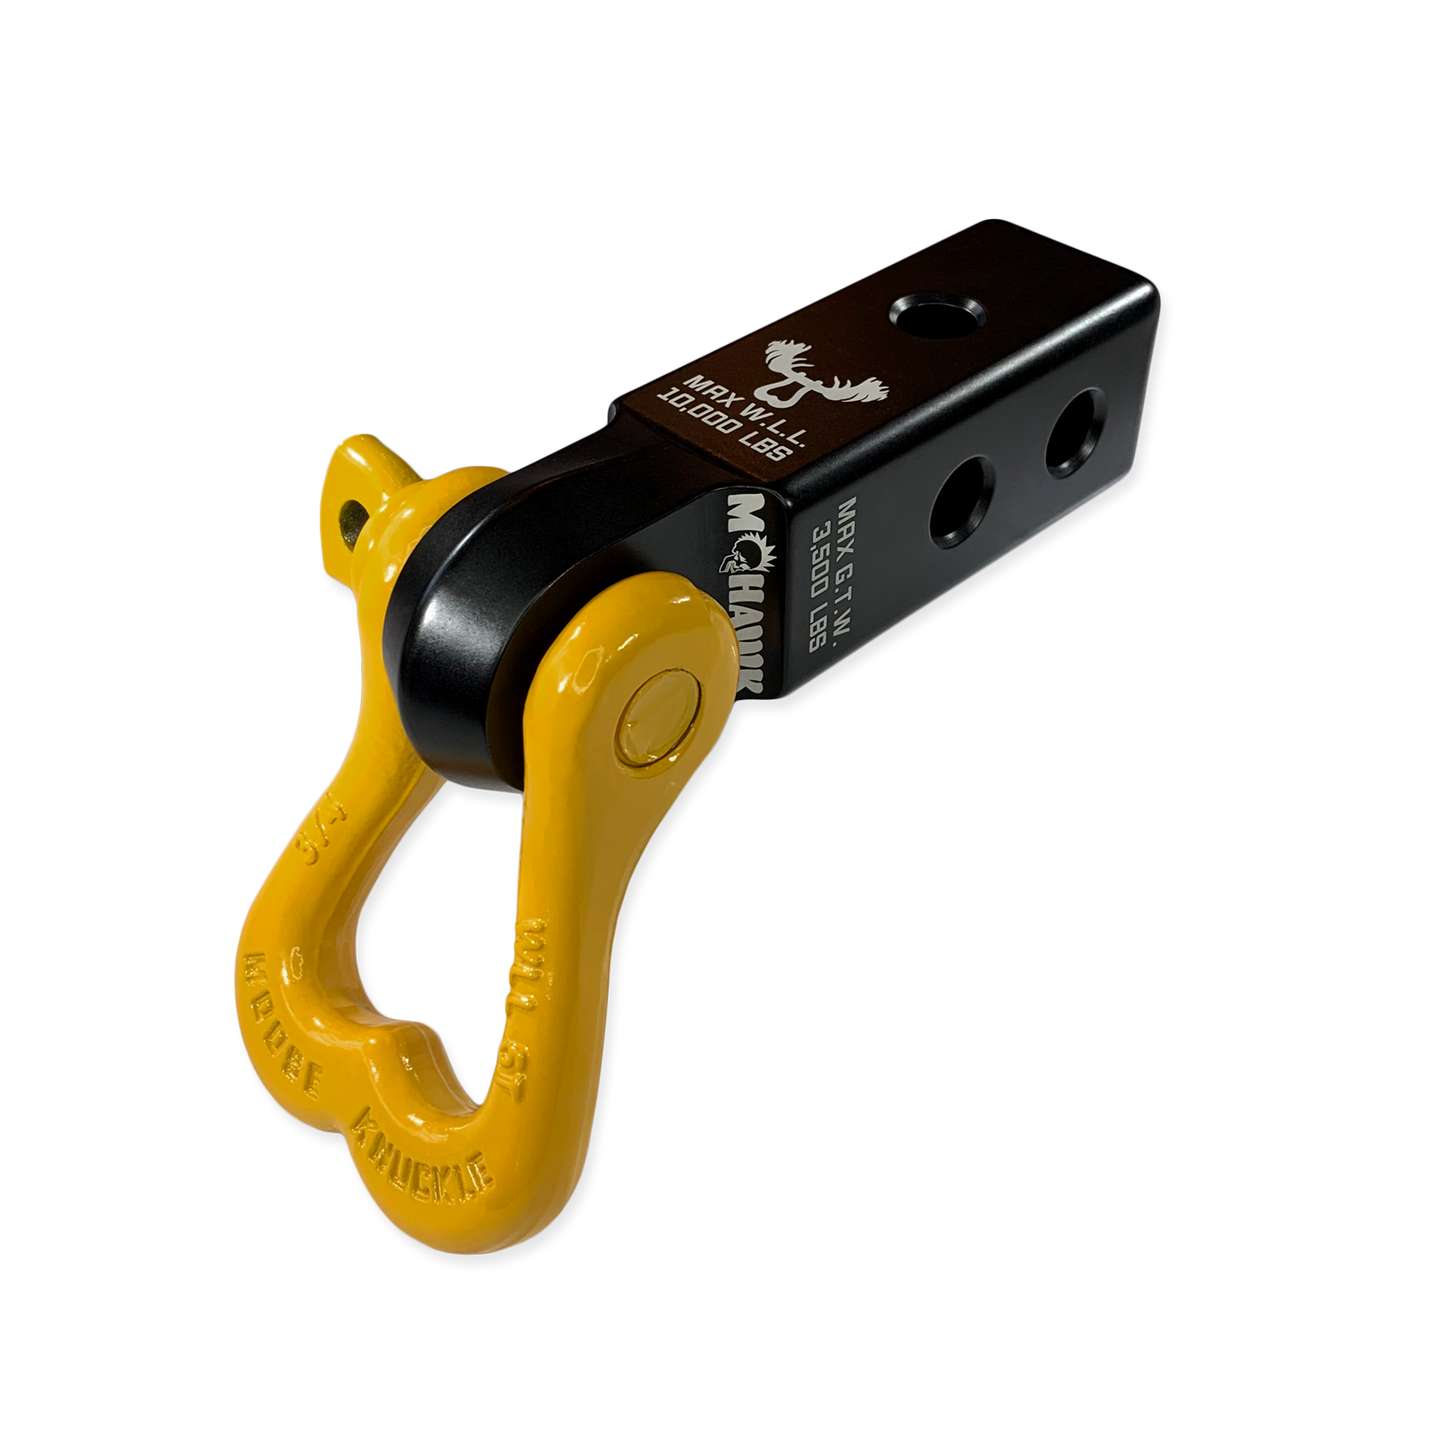 XL 3/4 Shackle and Mohawk 2.0 Receiver Combo